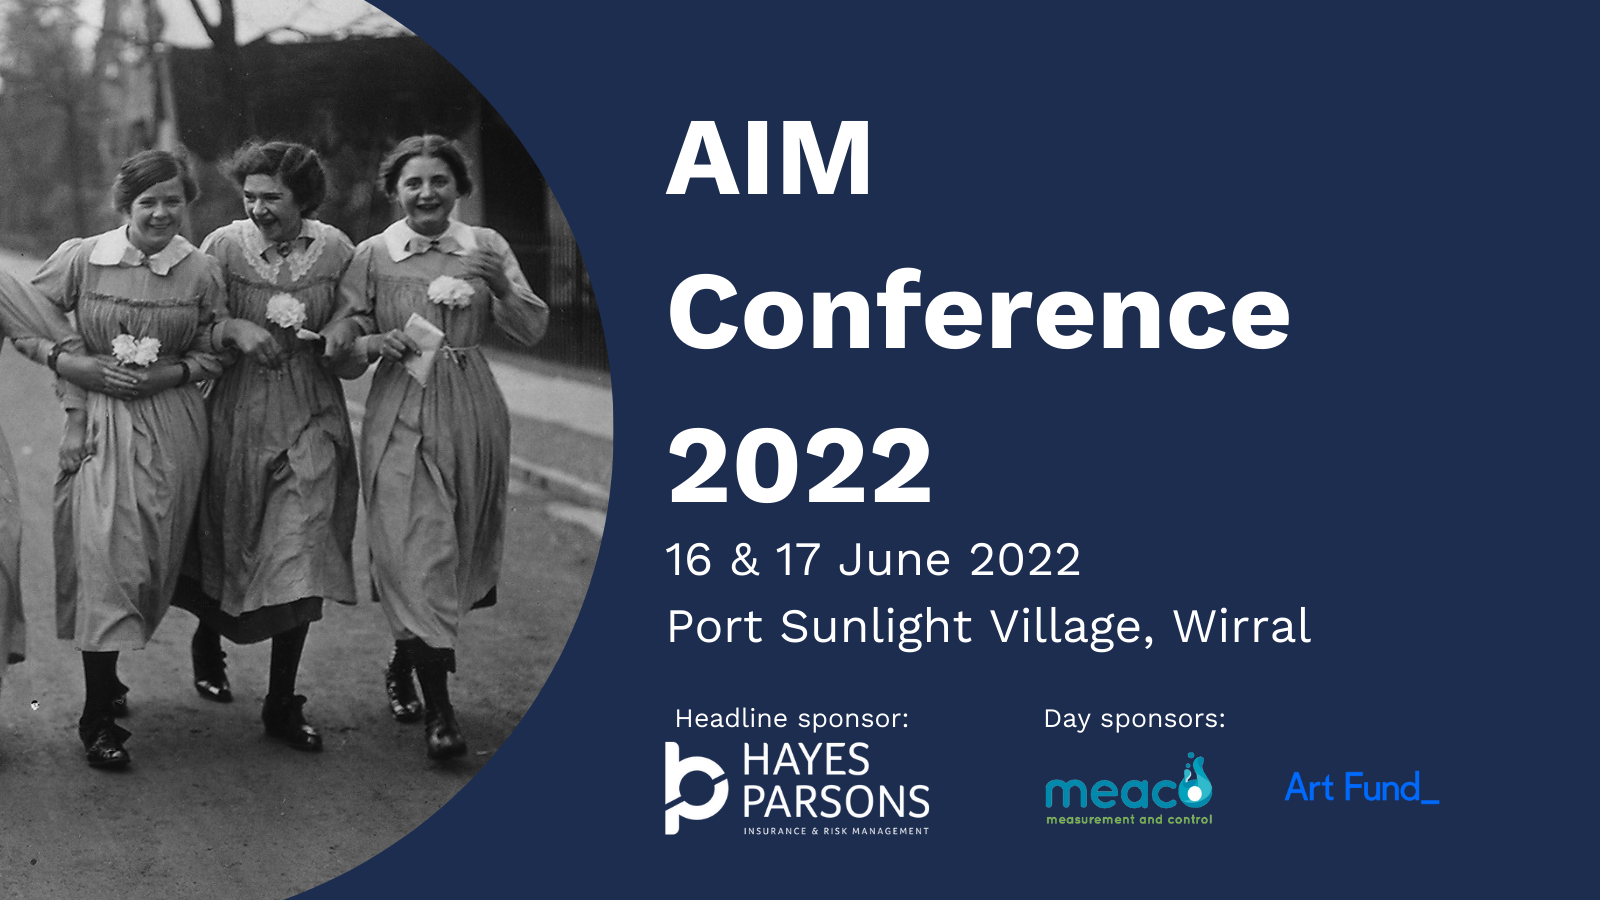 AIM Conference 2022